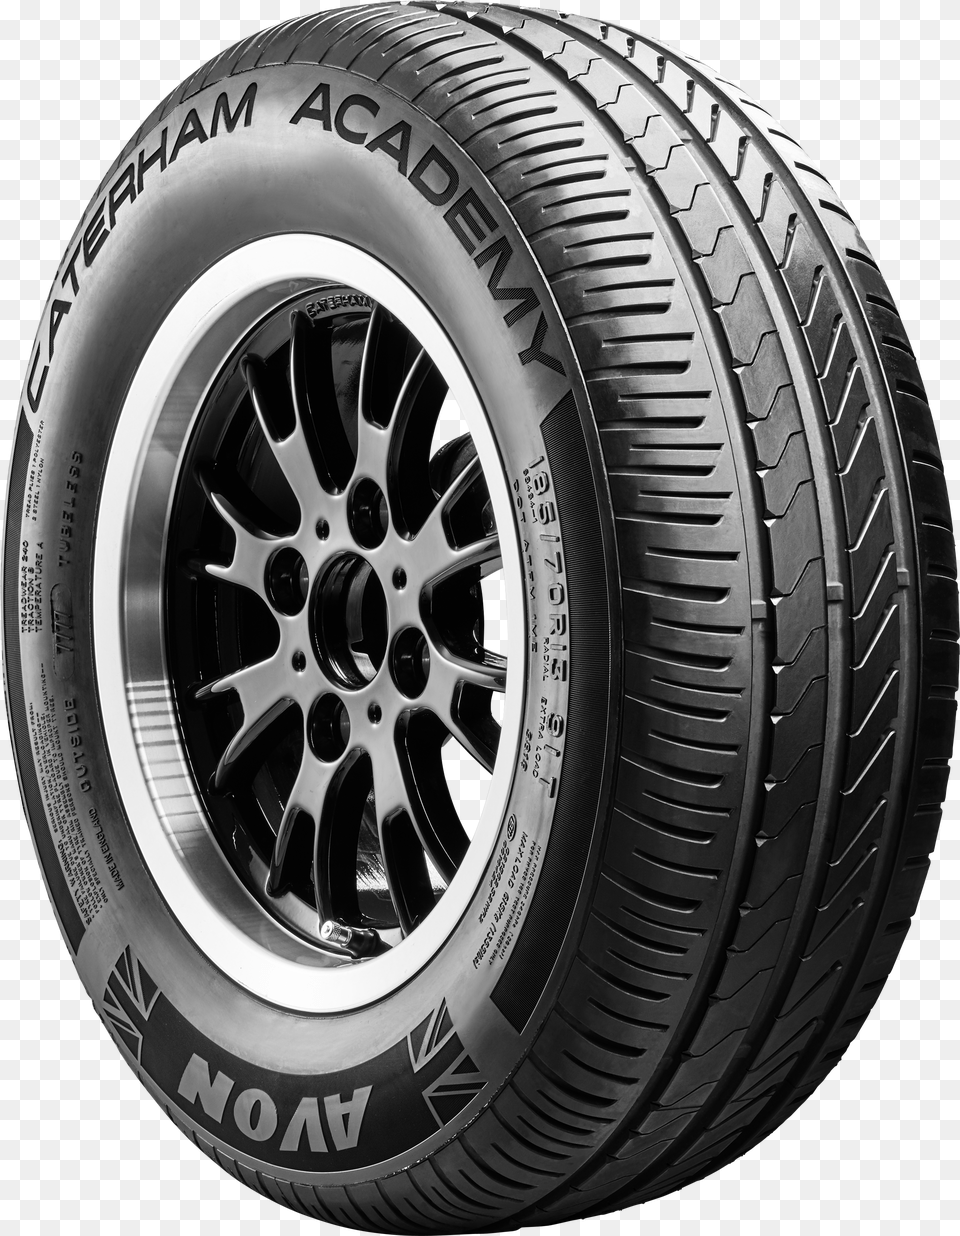 Caterham Cars Synthetic Rubber, Alloy Wheel, Car, Car Wheel, Machine Png